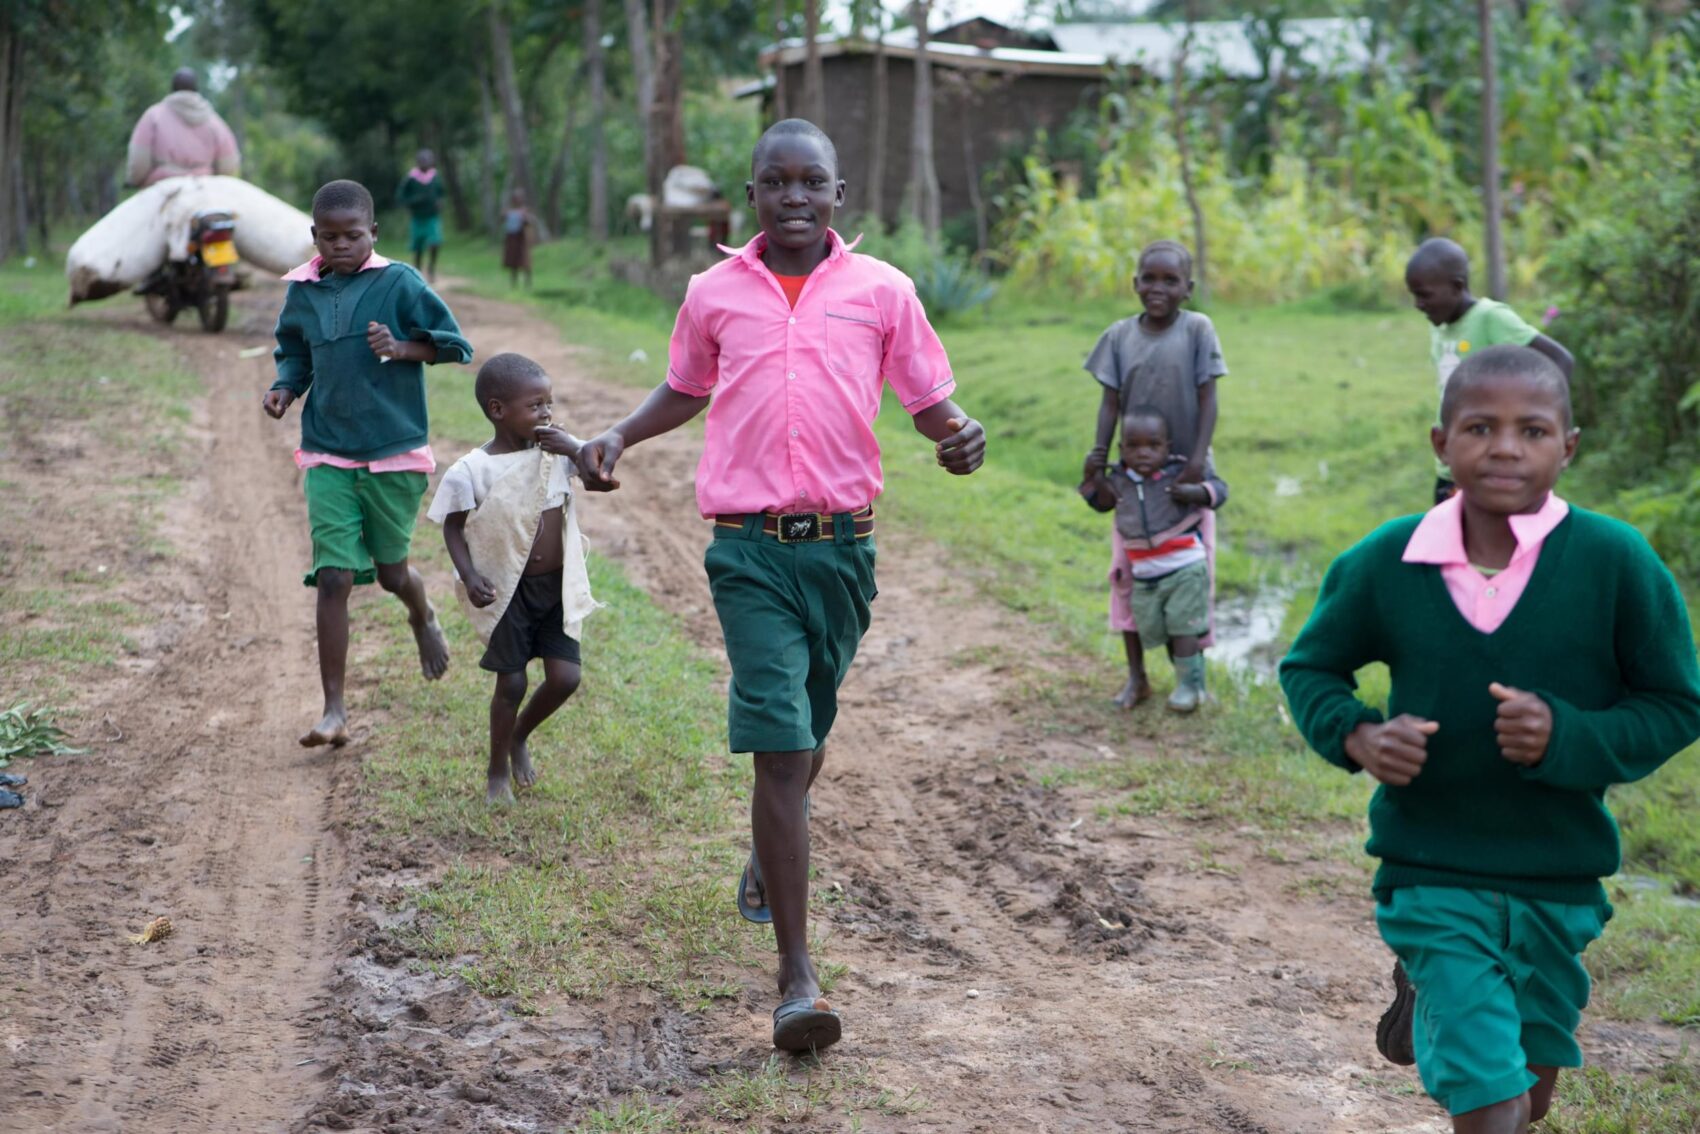 Children run towards the camera in rural Kenya. They are wearing pink and green school uniforms.